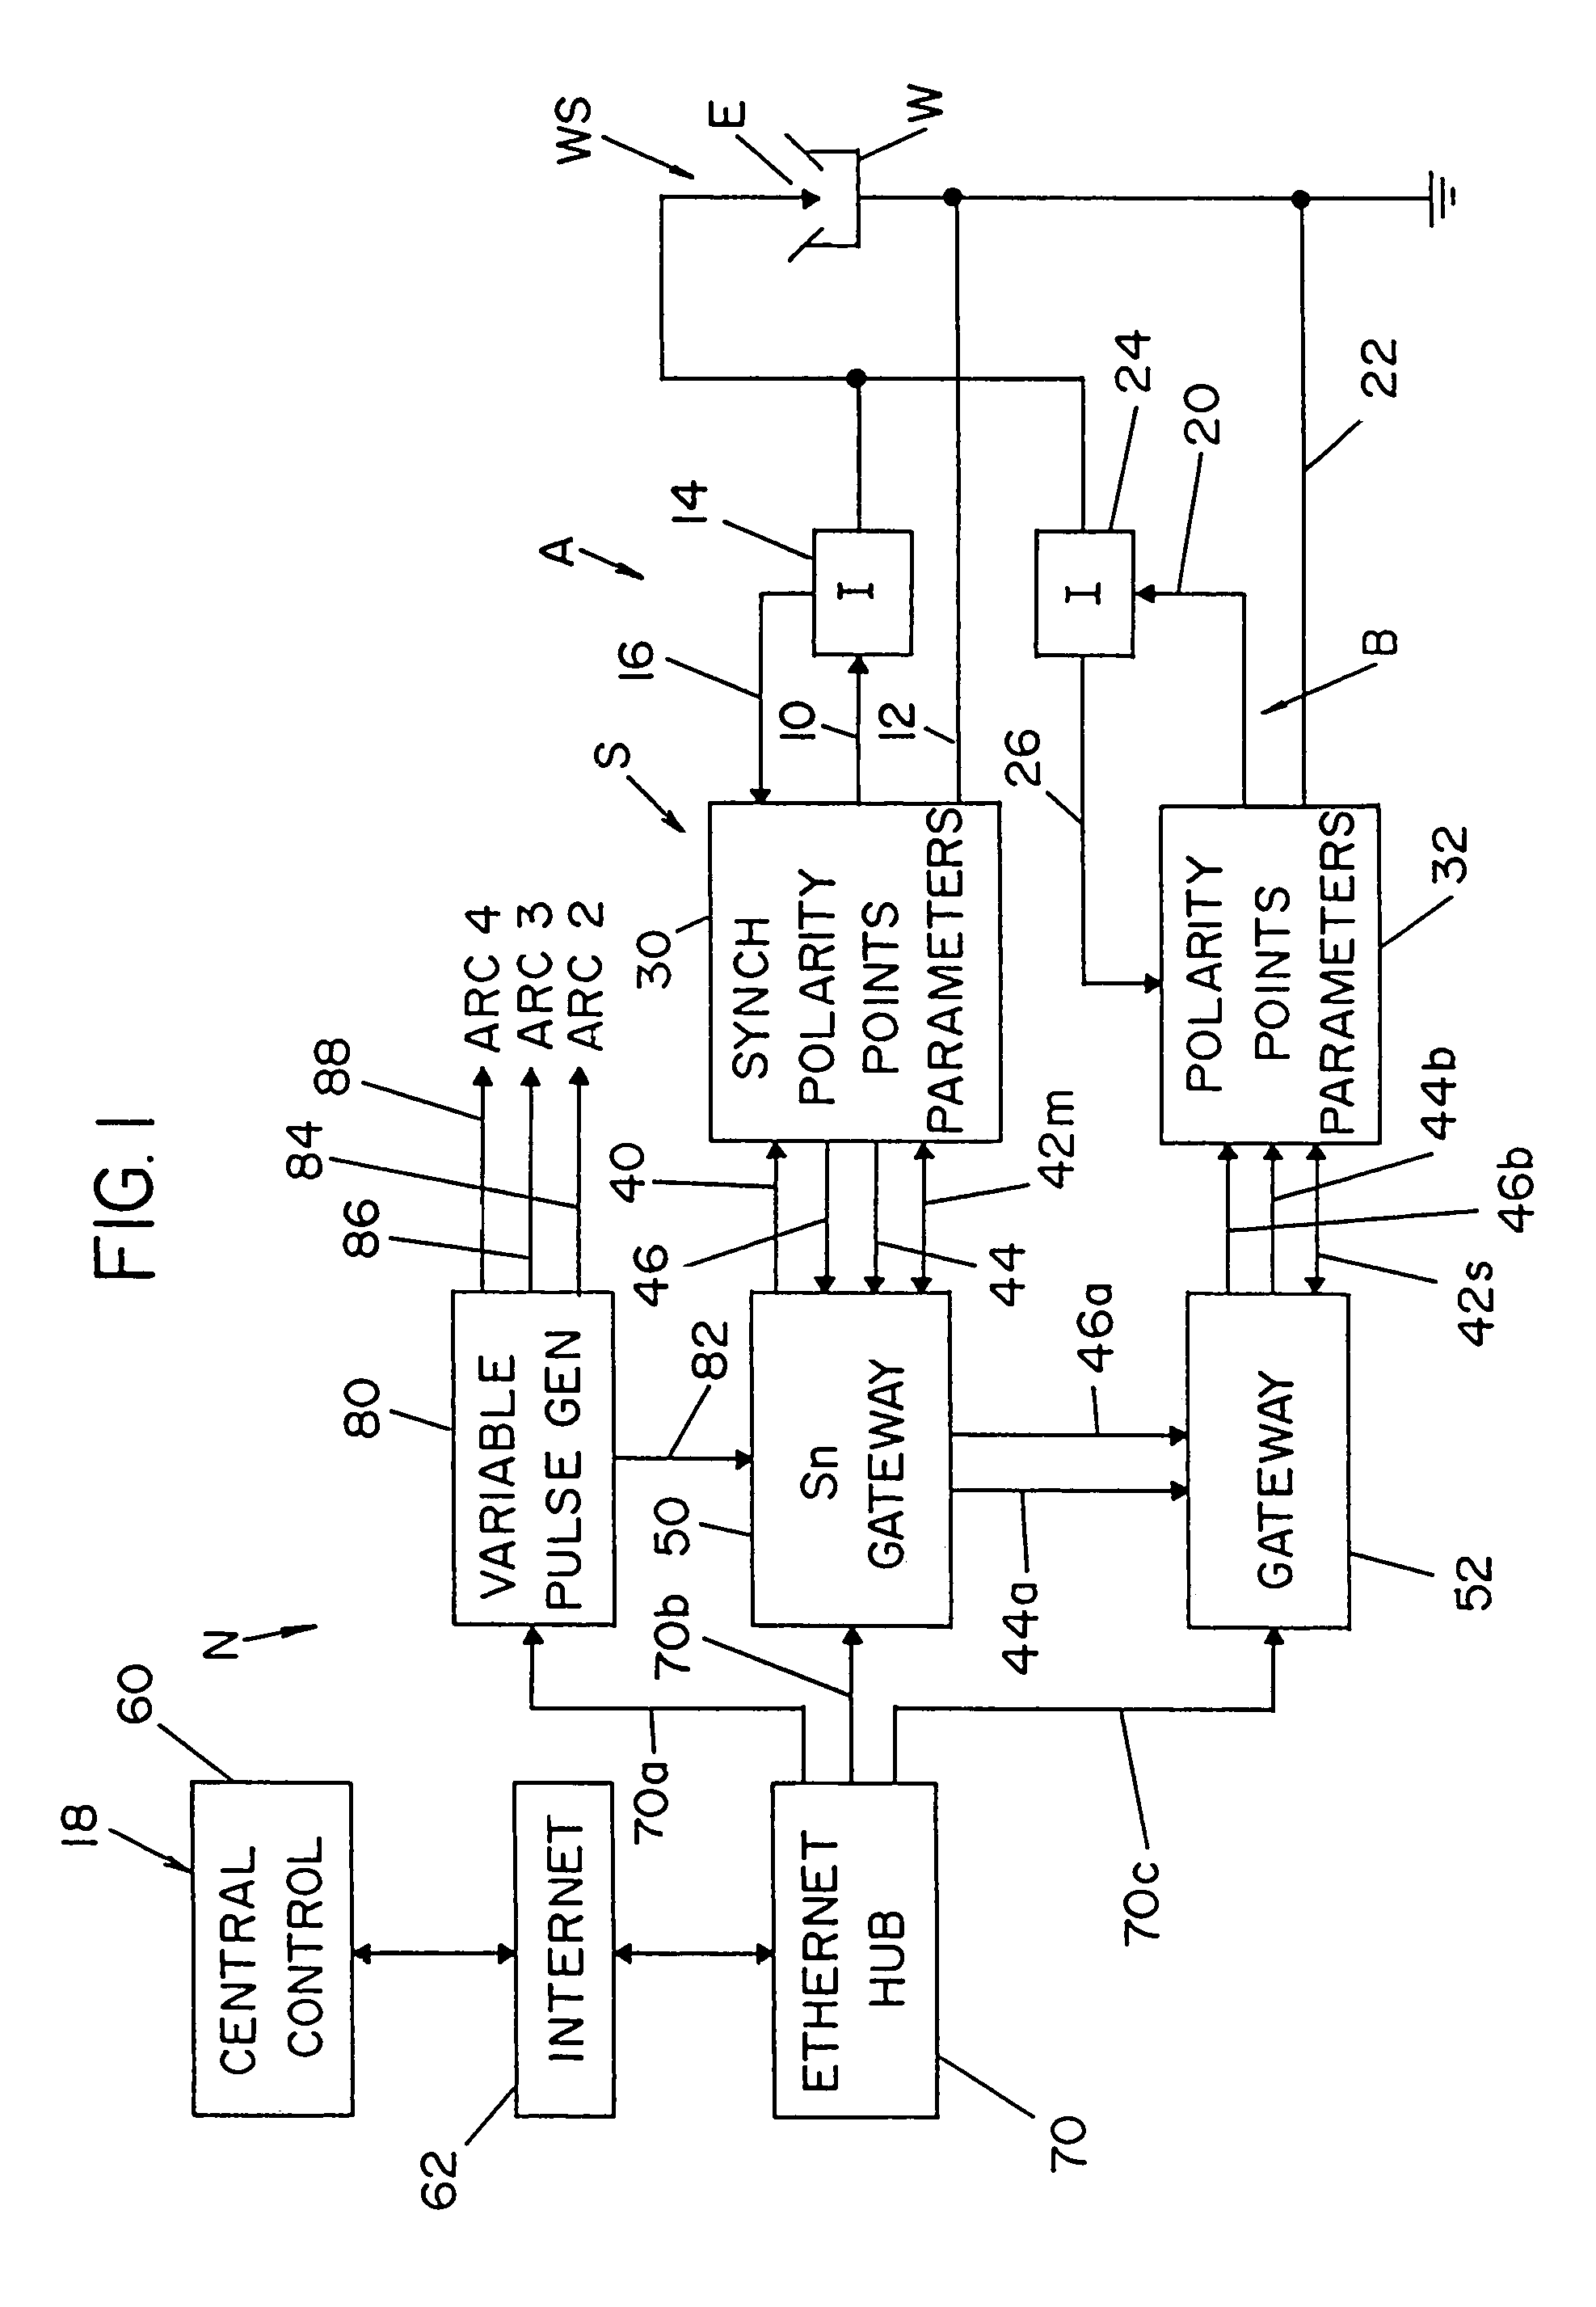 Electric ARC welder system with waveform profile control for cored electrodes